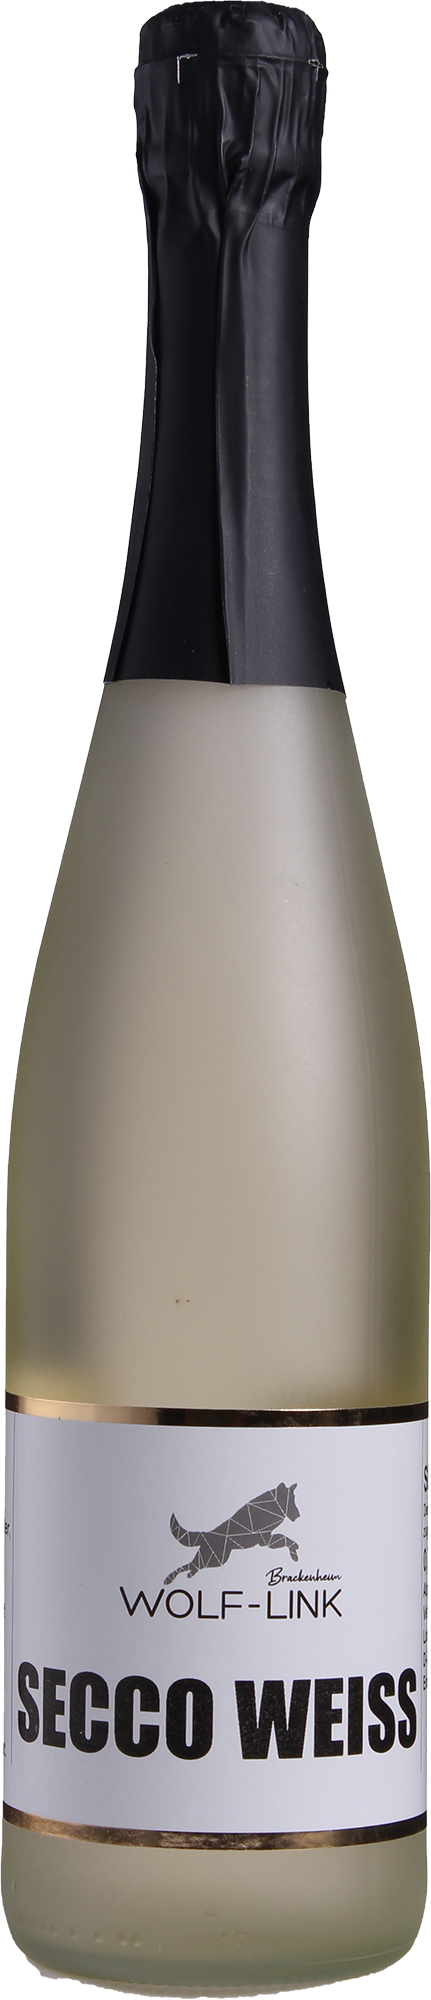 Secco weiss 0,75 L - Weingut Wolf-Link